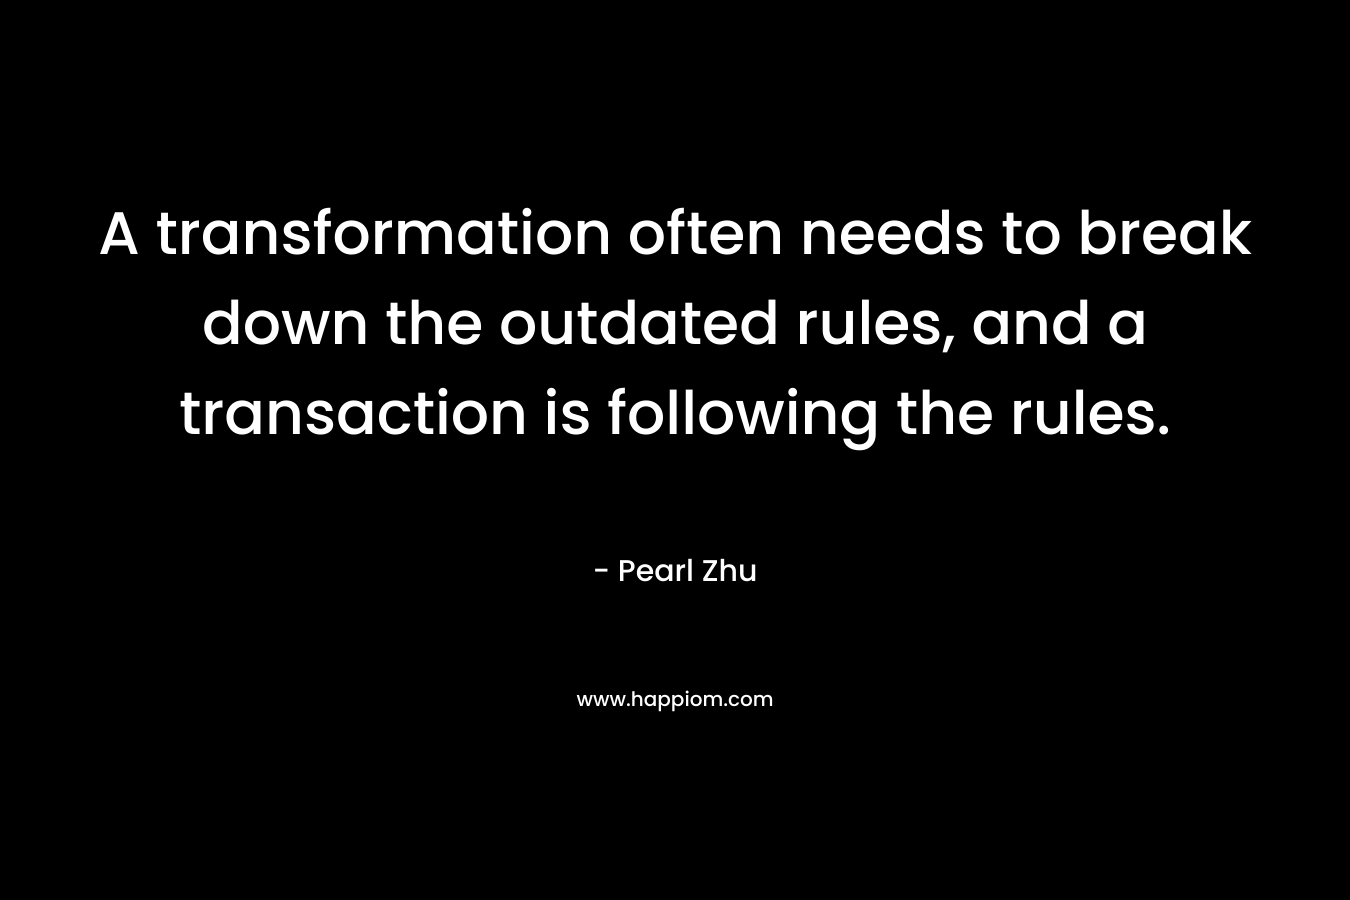 A transformation often needs to break down the outdated rules, and a transaction is following the rules.